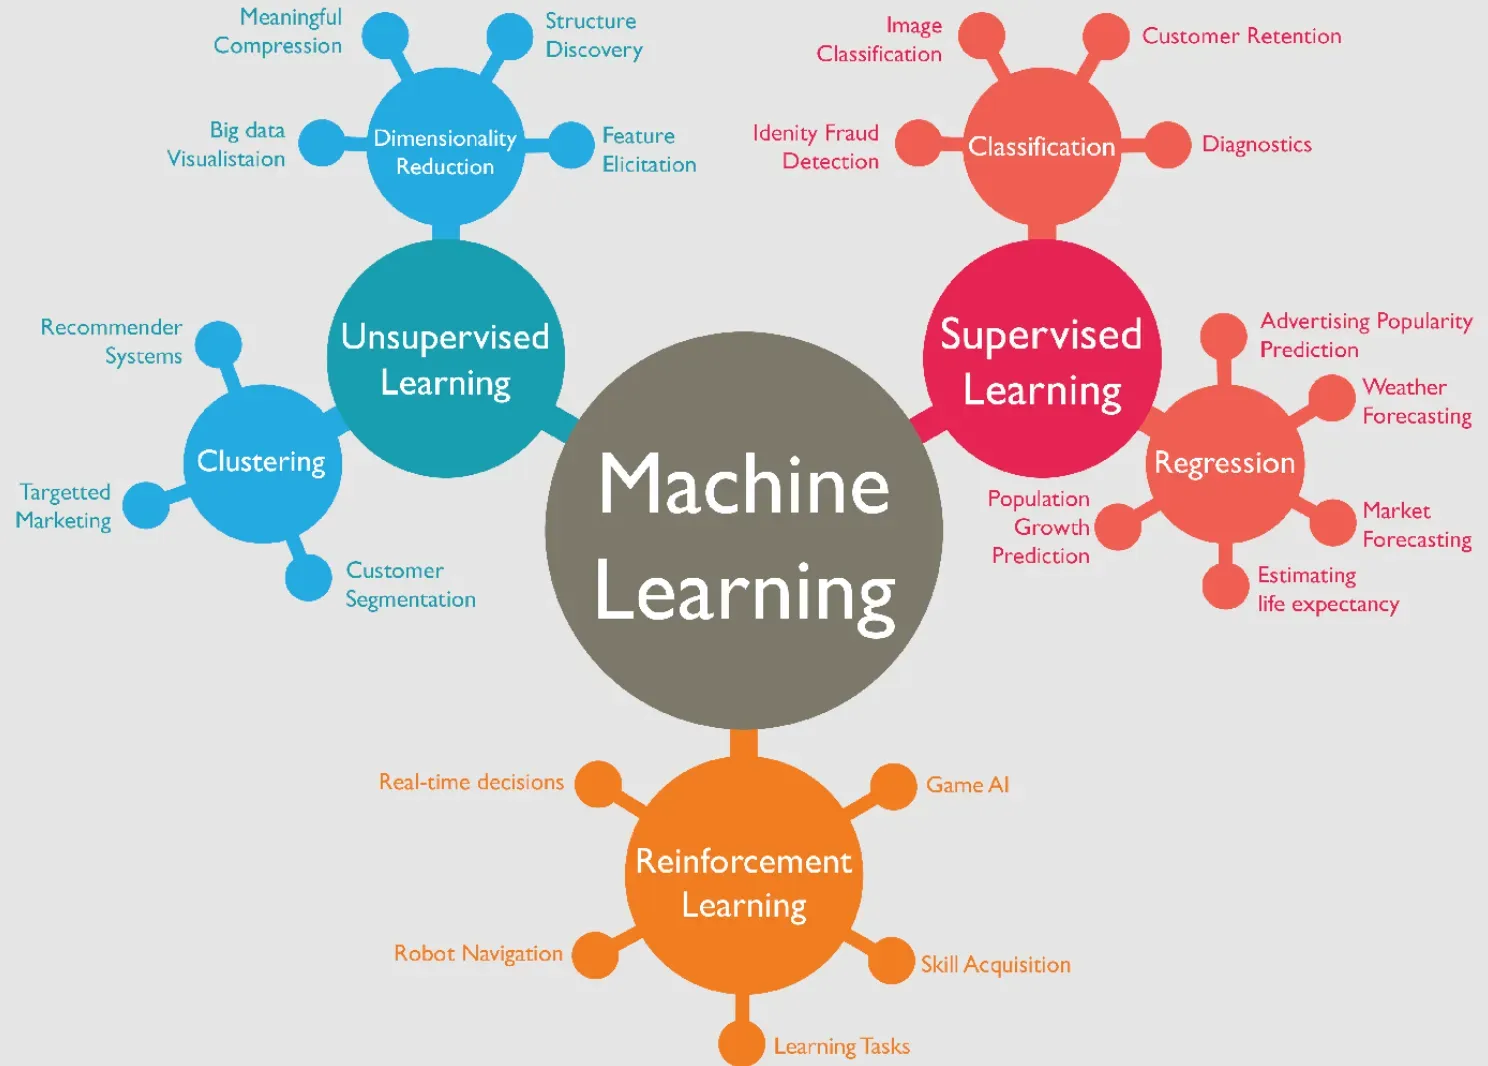 What are Machine Learning Methods?